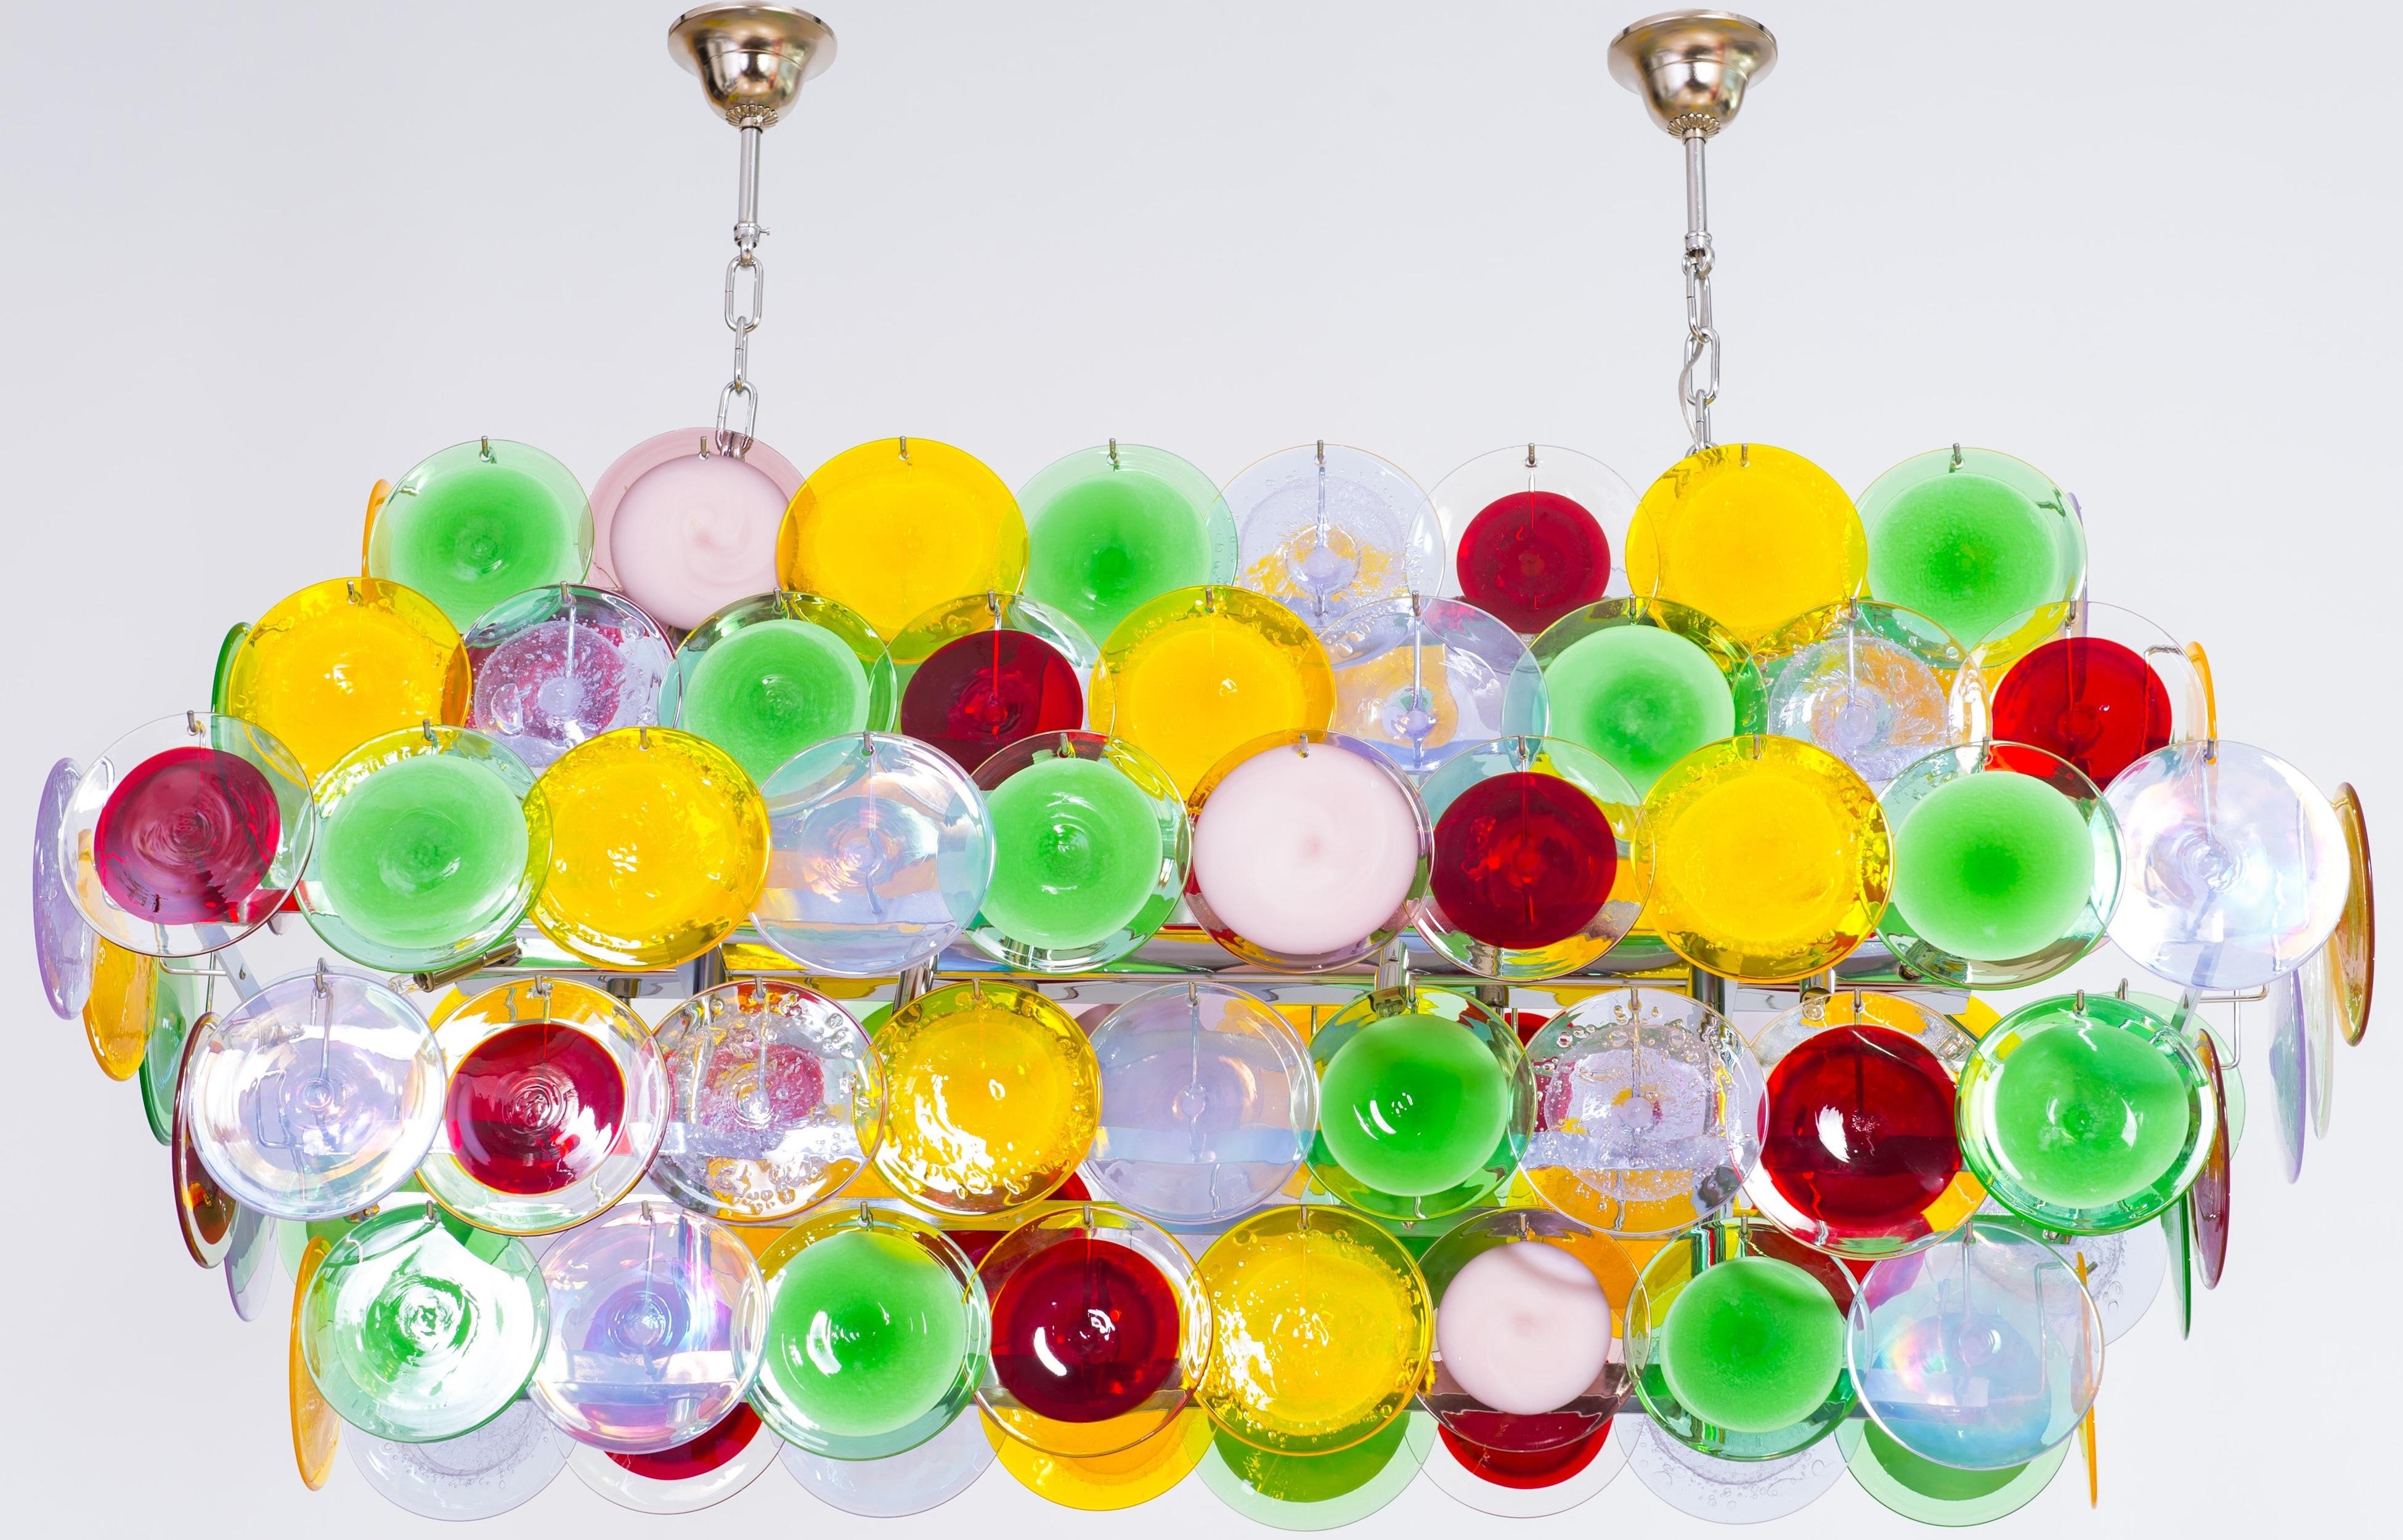 Modern Murano glass flushmount with multicolored disc, Giovanni Dalla Fina, Italy.
This outstanding and brightful flushmount is made of a chromed metal frame, which supports a huge variety of colored Murano glass discs. The discs are entirely